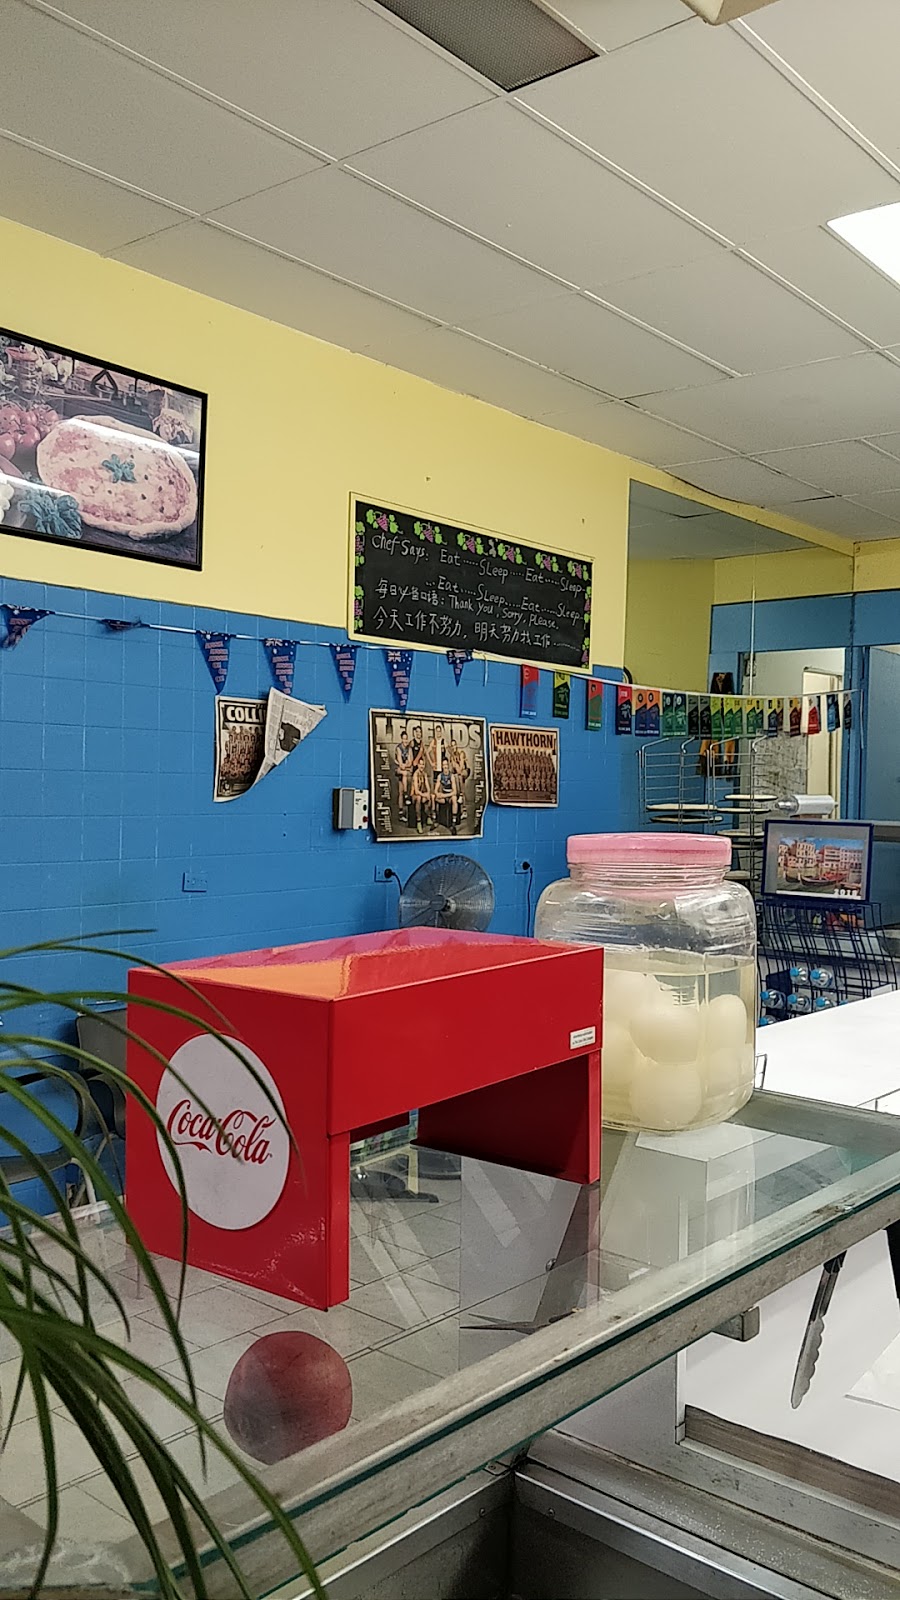 Armadale Pizza & Pasta & Fish & Chips | meal delivery | 695 High St, Armadale VIC 3143, Australia | 0395252077 OR +61 3 9525 2077